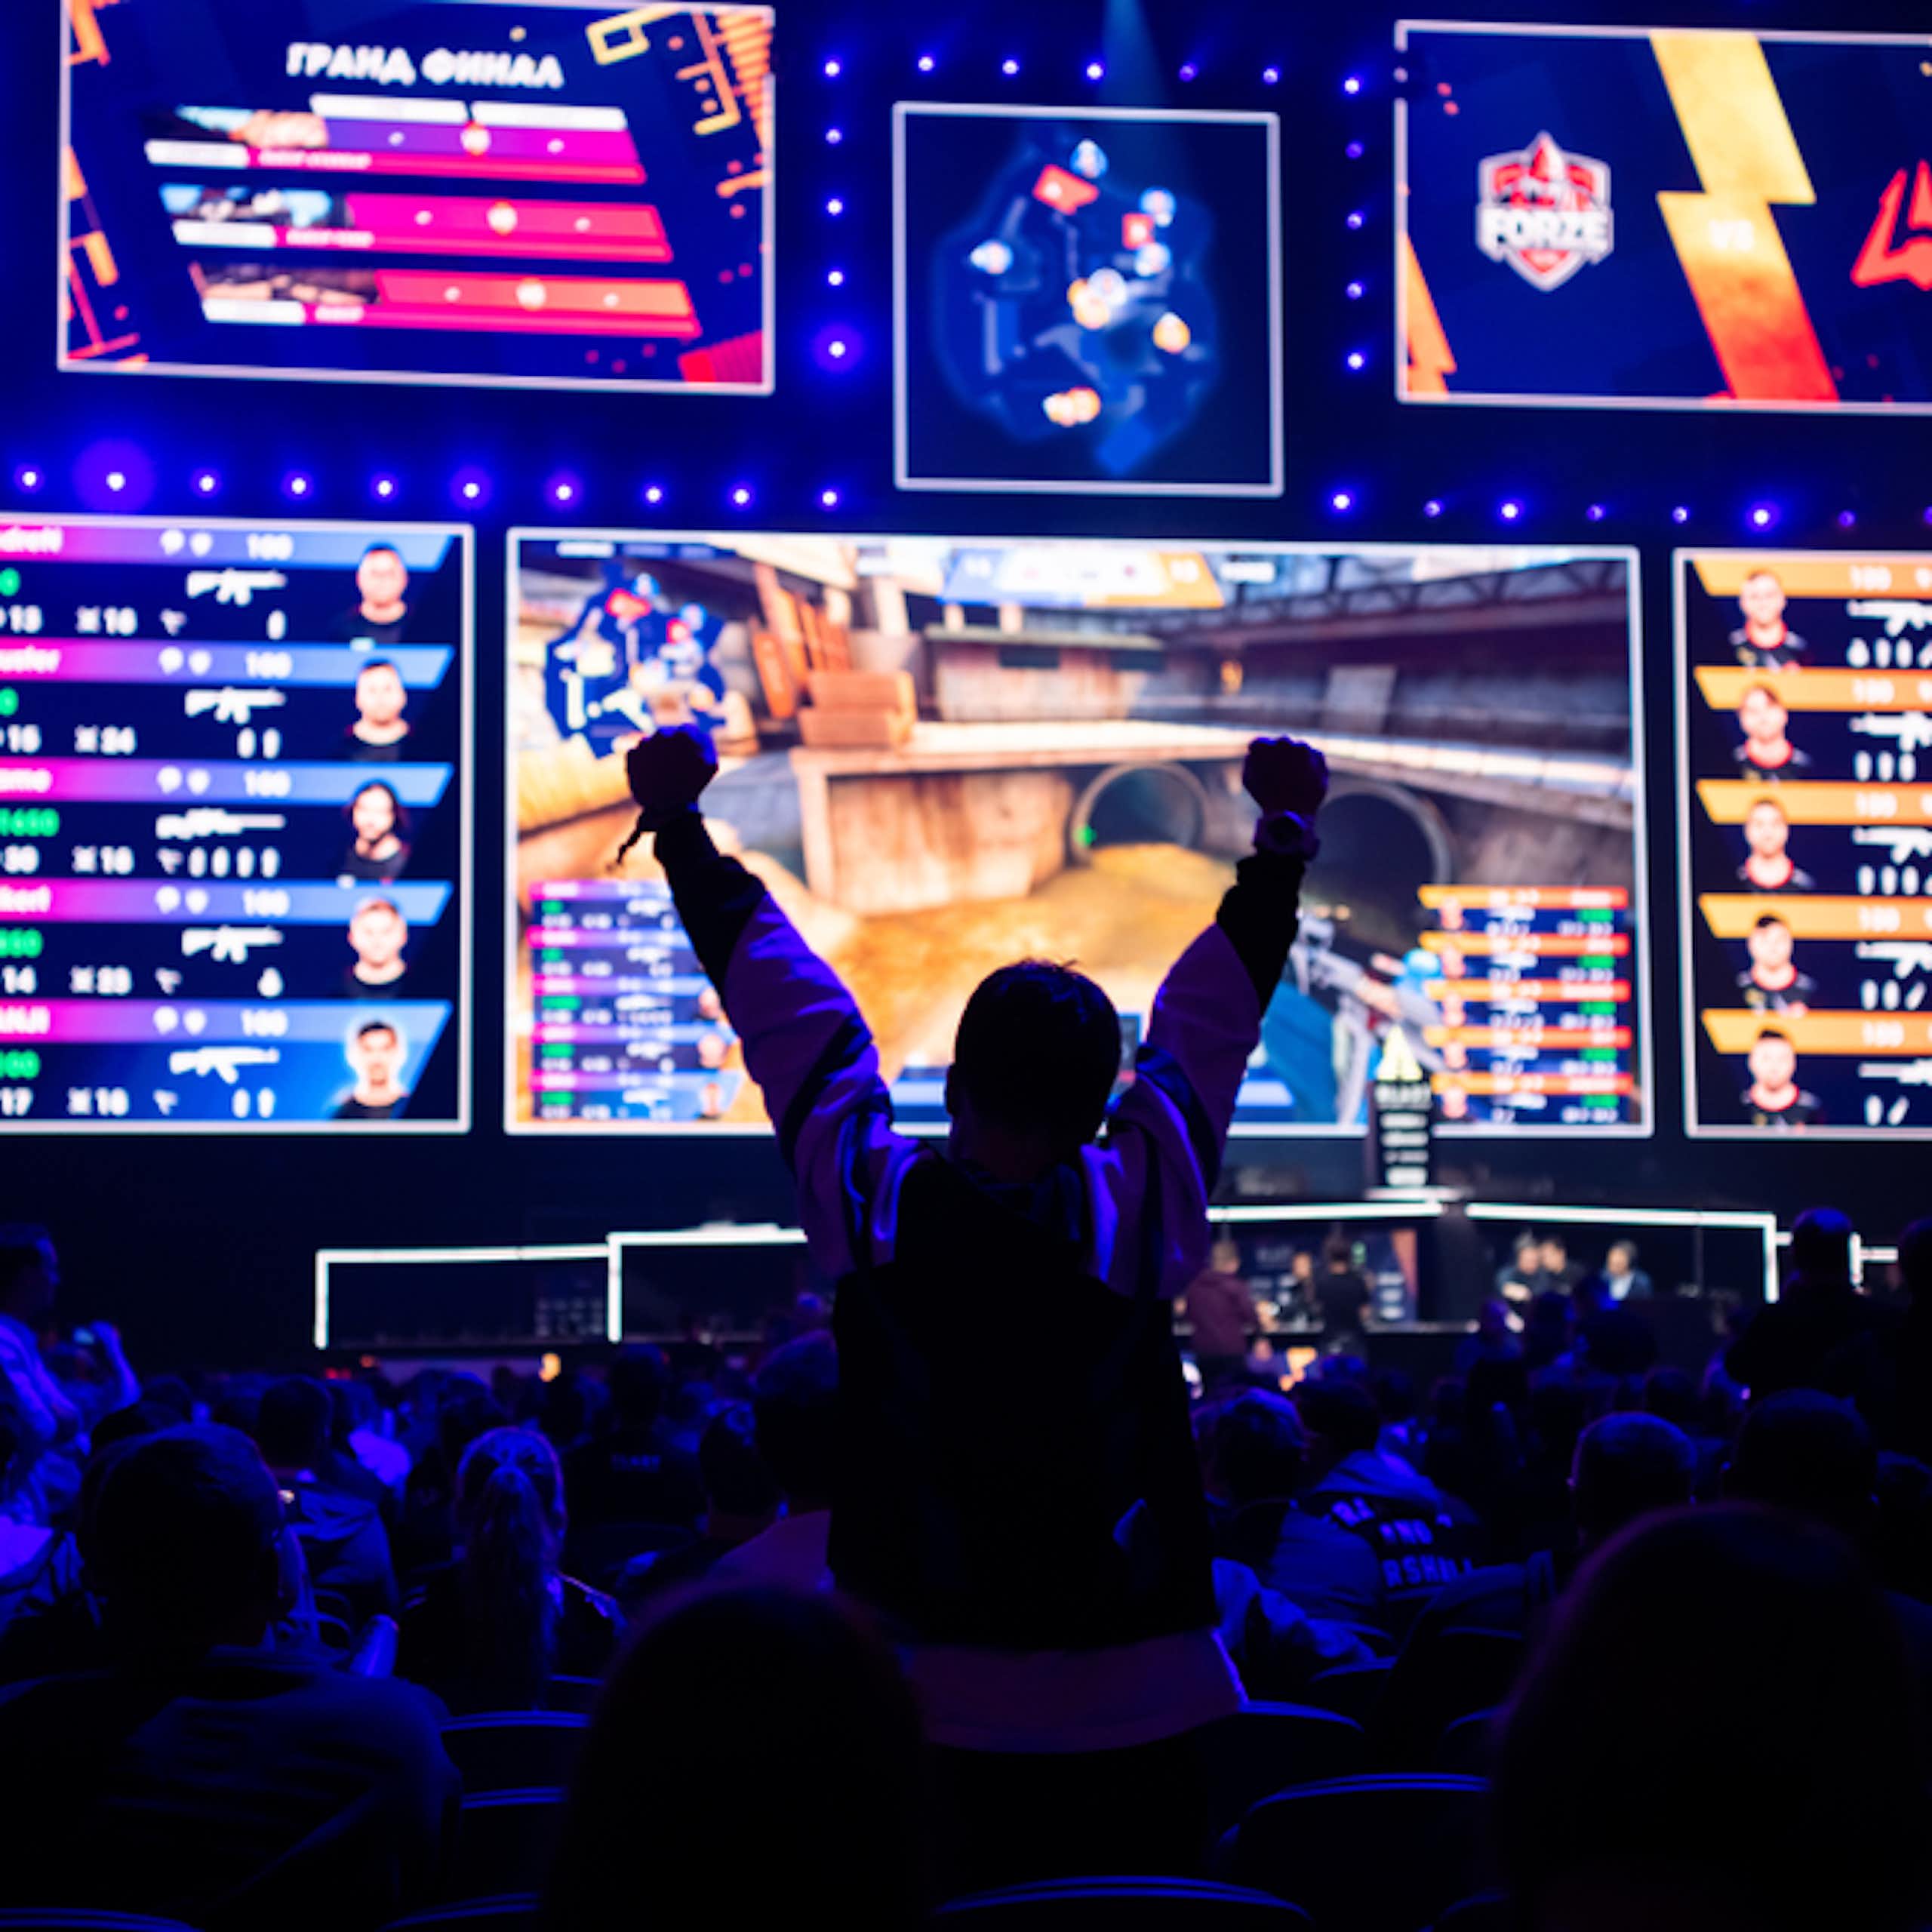  esports gaming event. Big illuminated main stage and screen and a fan with a hands raised at arena.